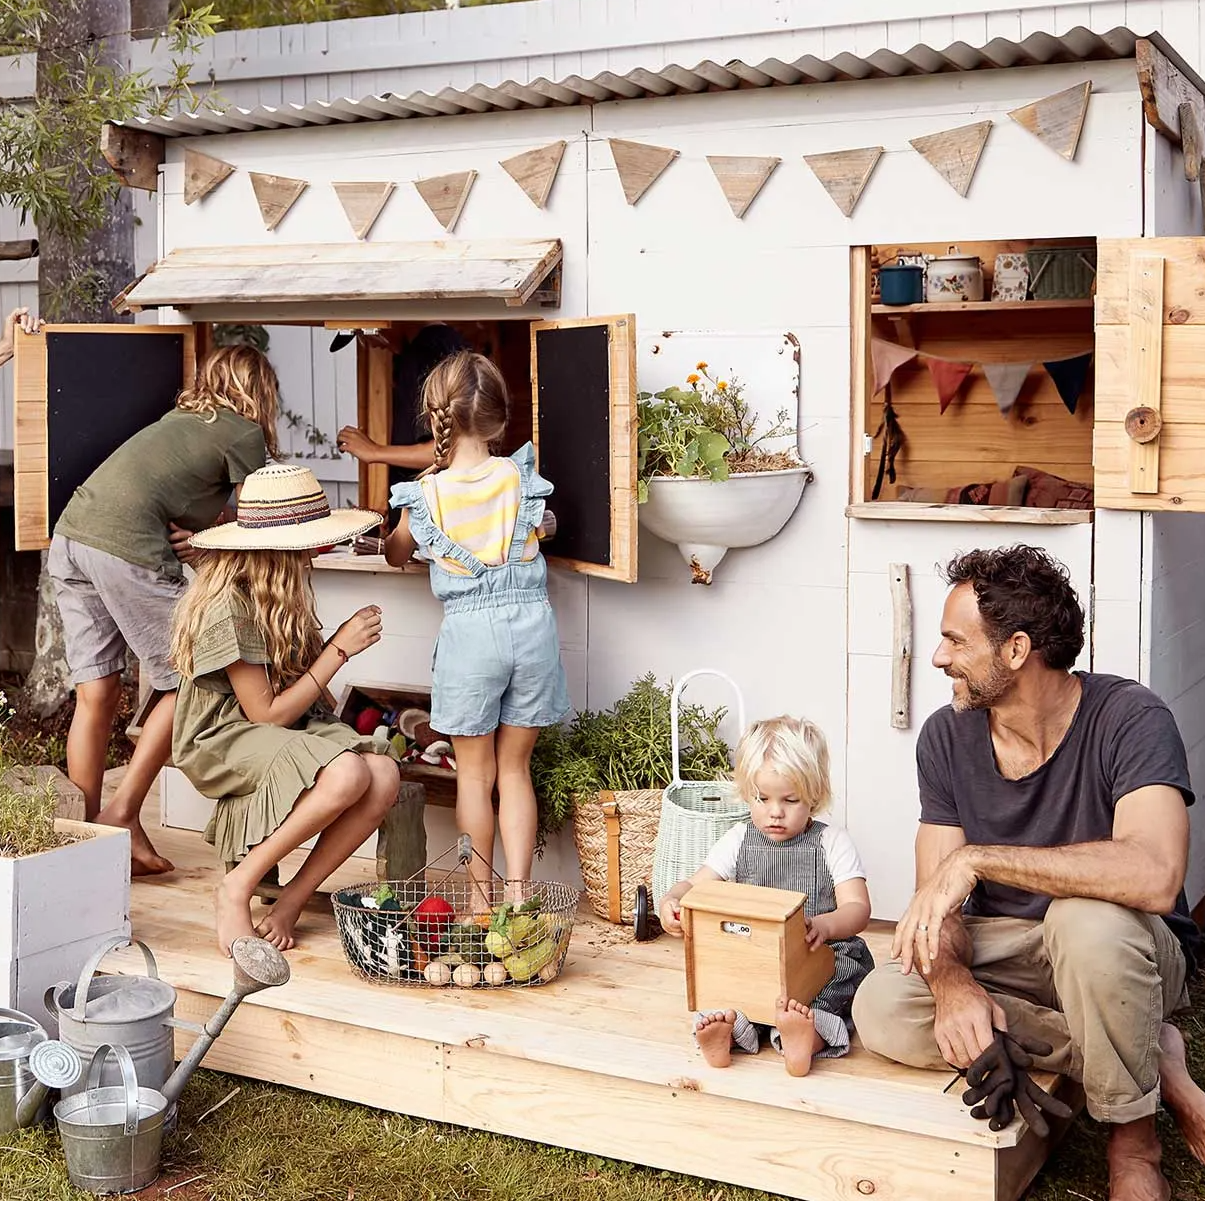 A flat roof cubby house with a family